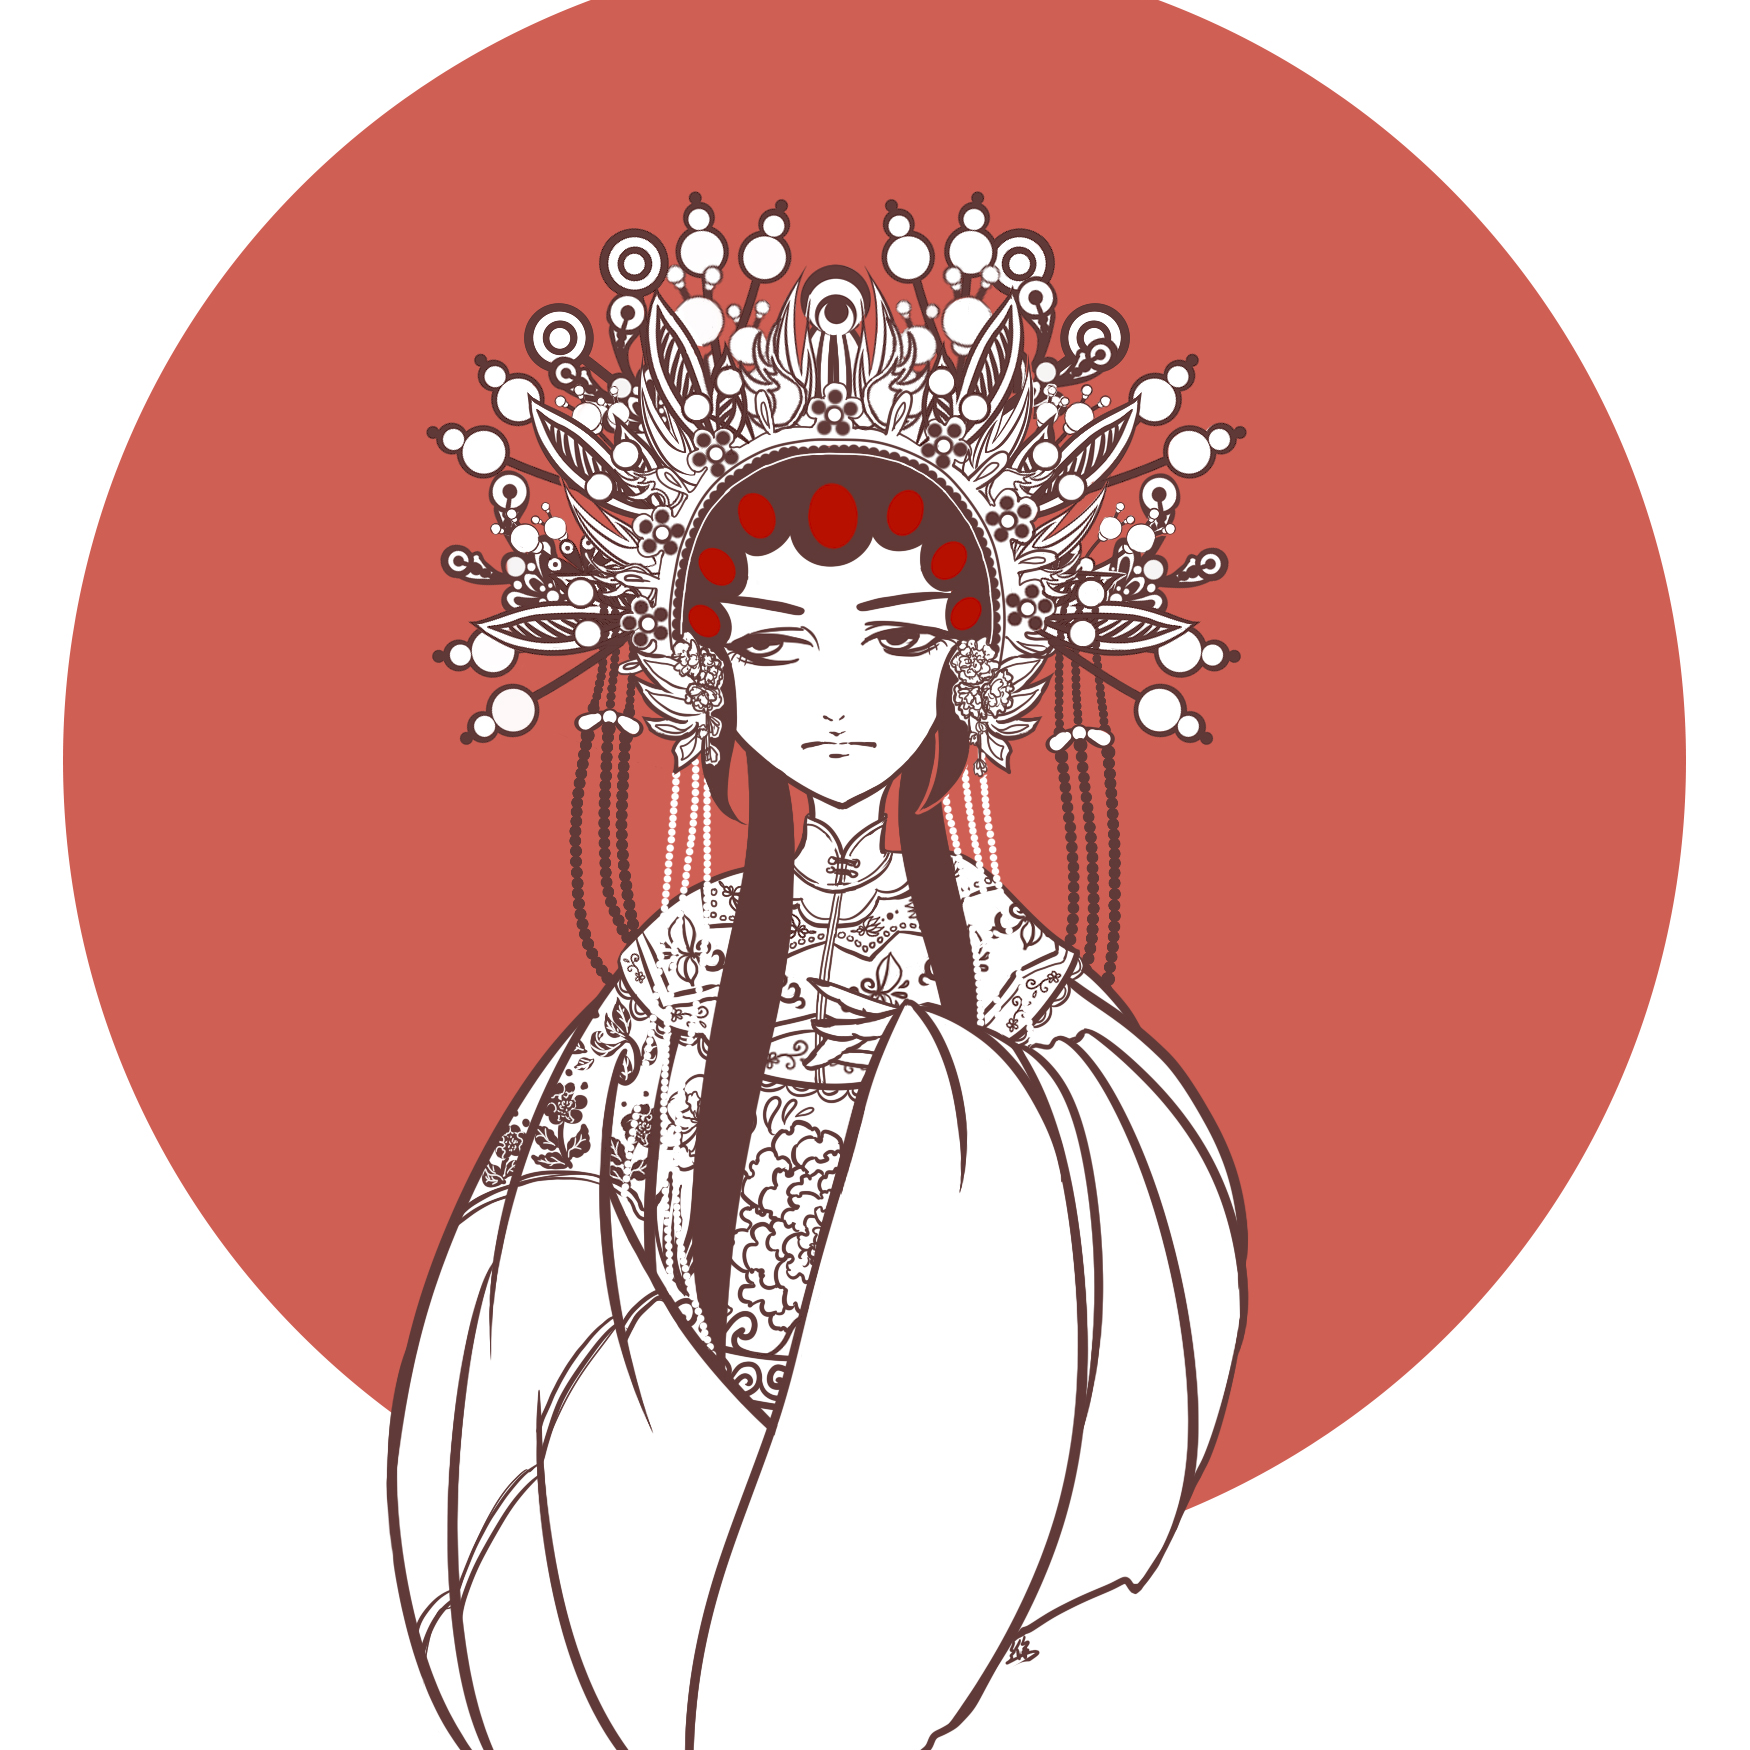 digital portrait of a woman with a heavily adorned headdress in anime style